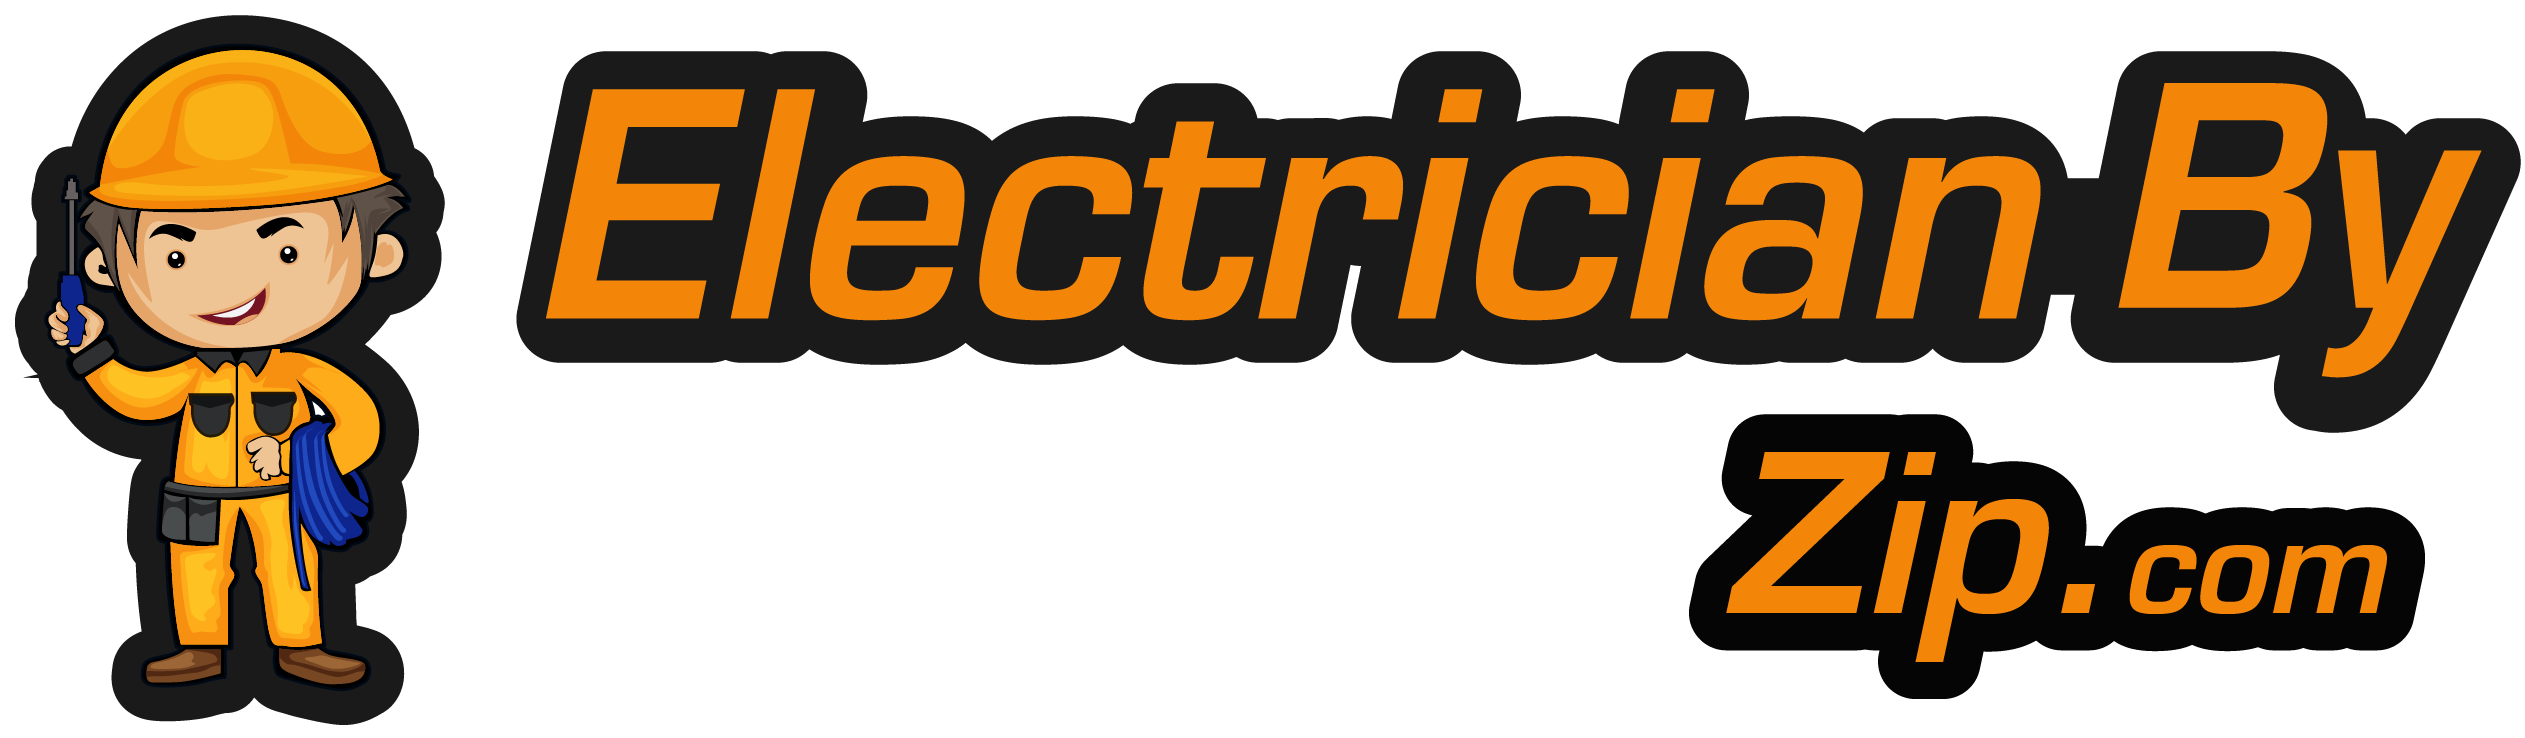 Electrician By Zip